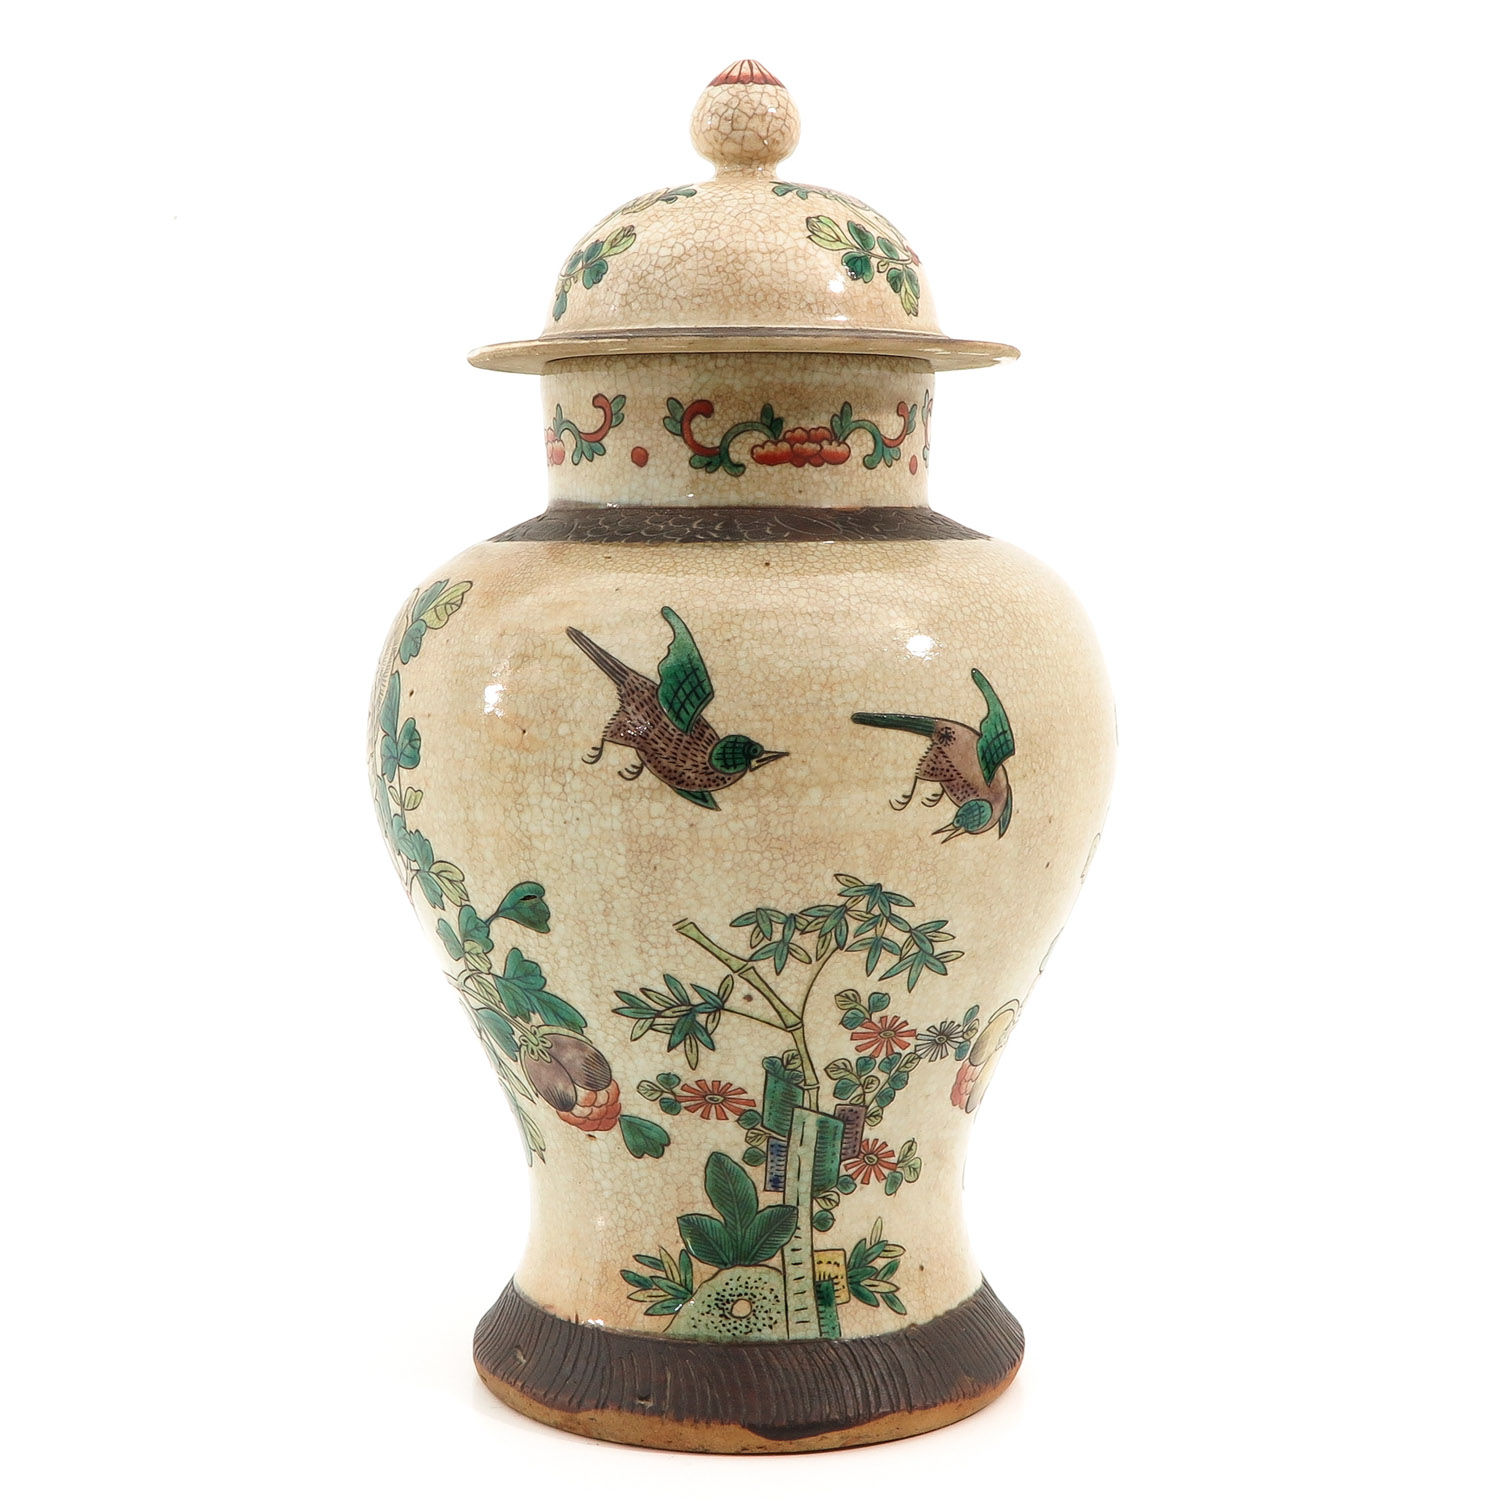 A Nanking Jar with Cover - Image 3 of 10